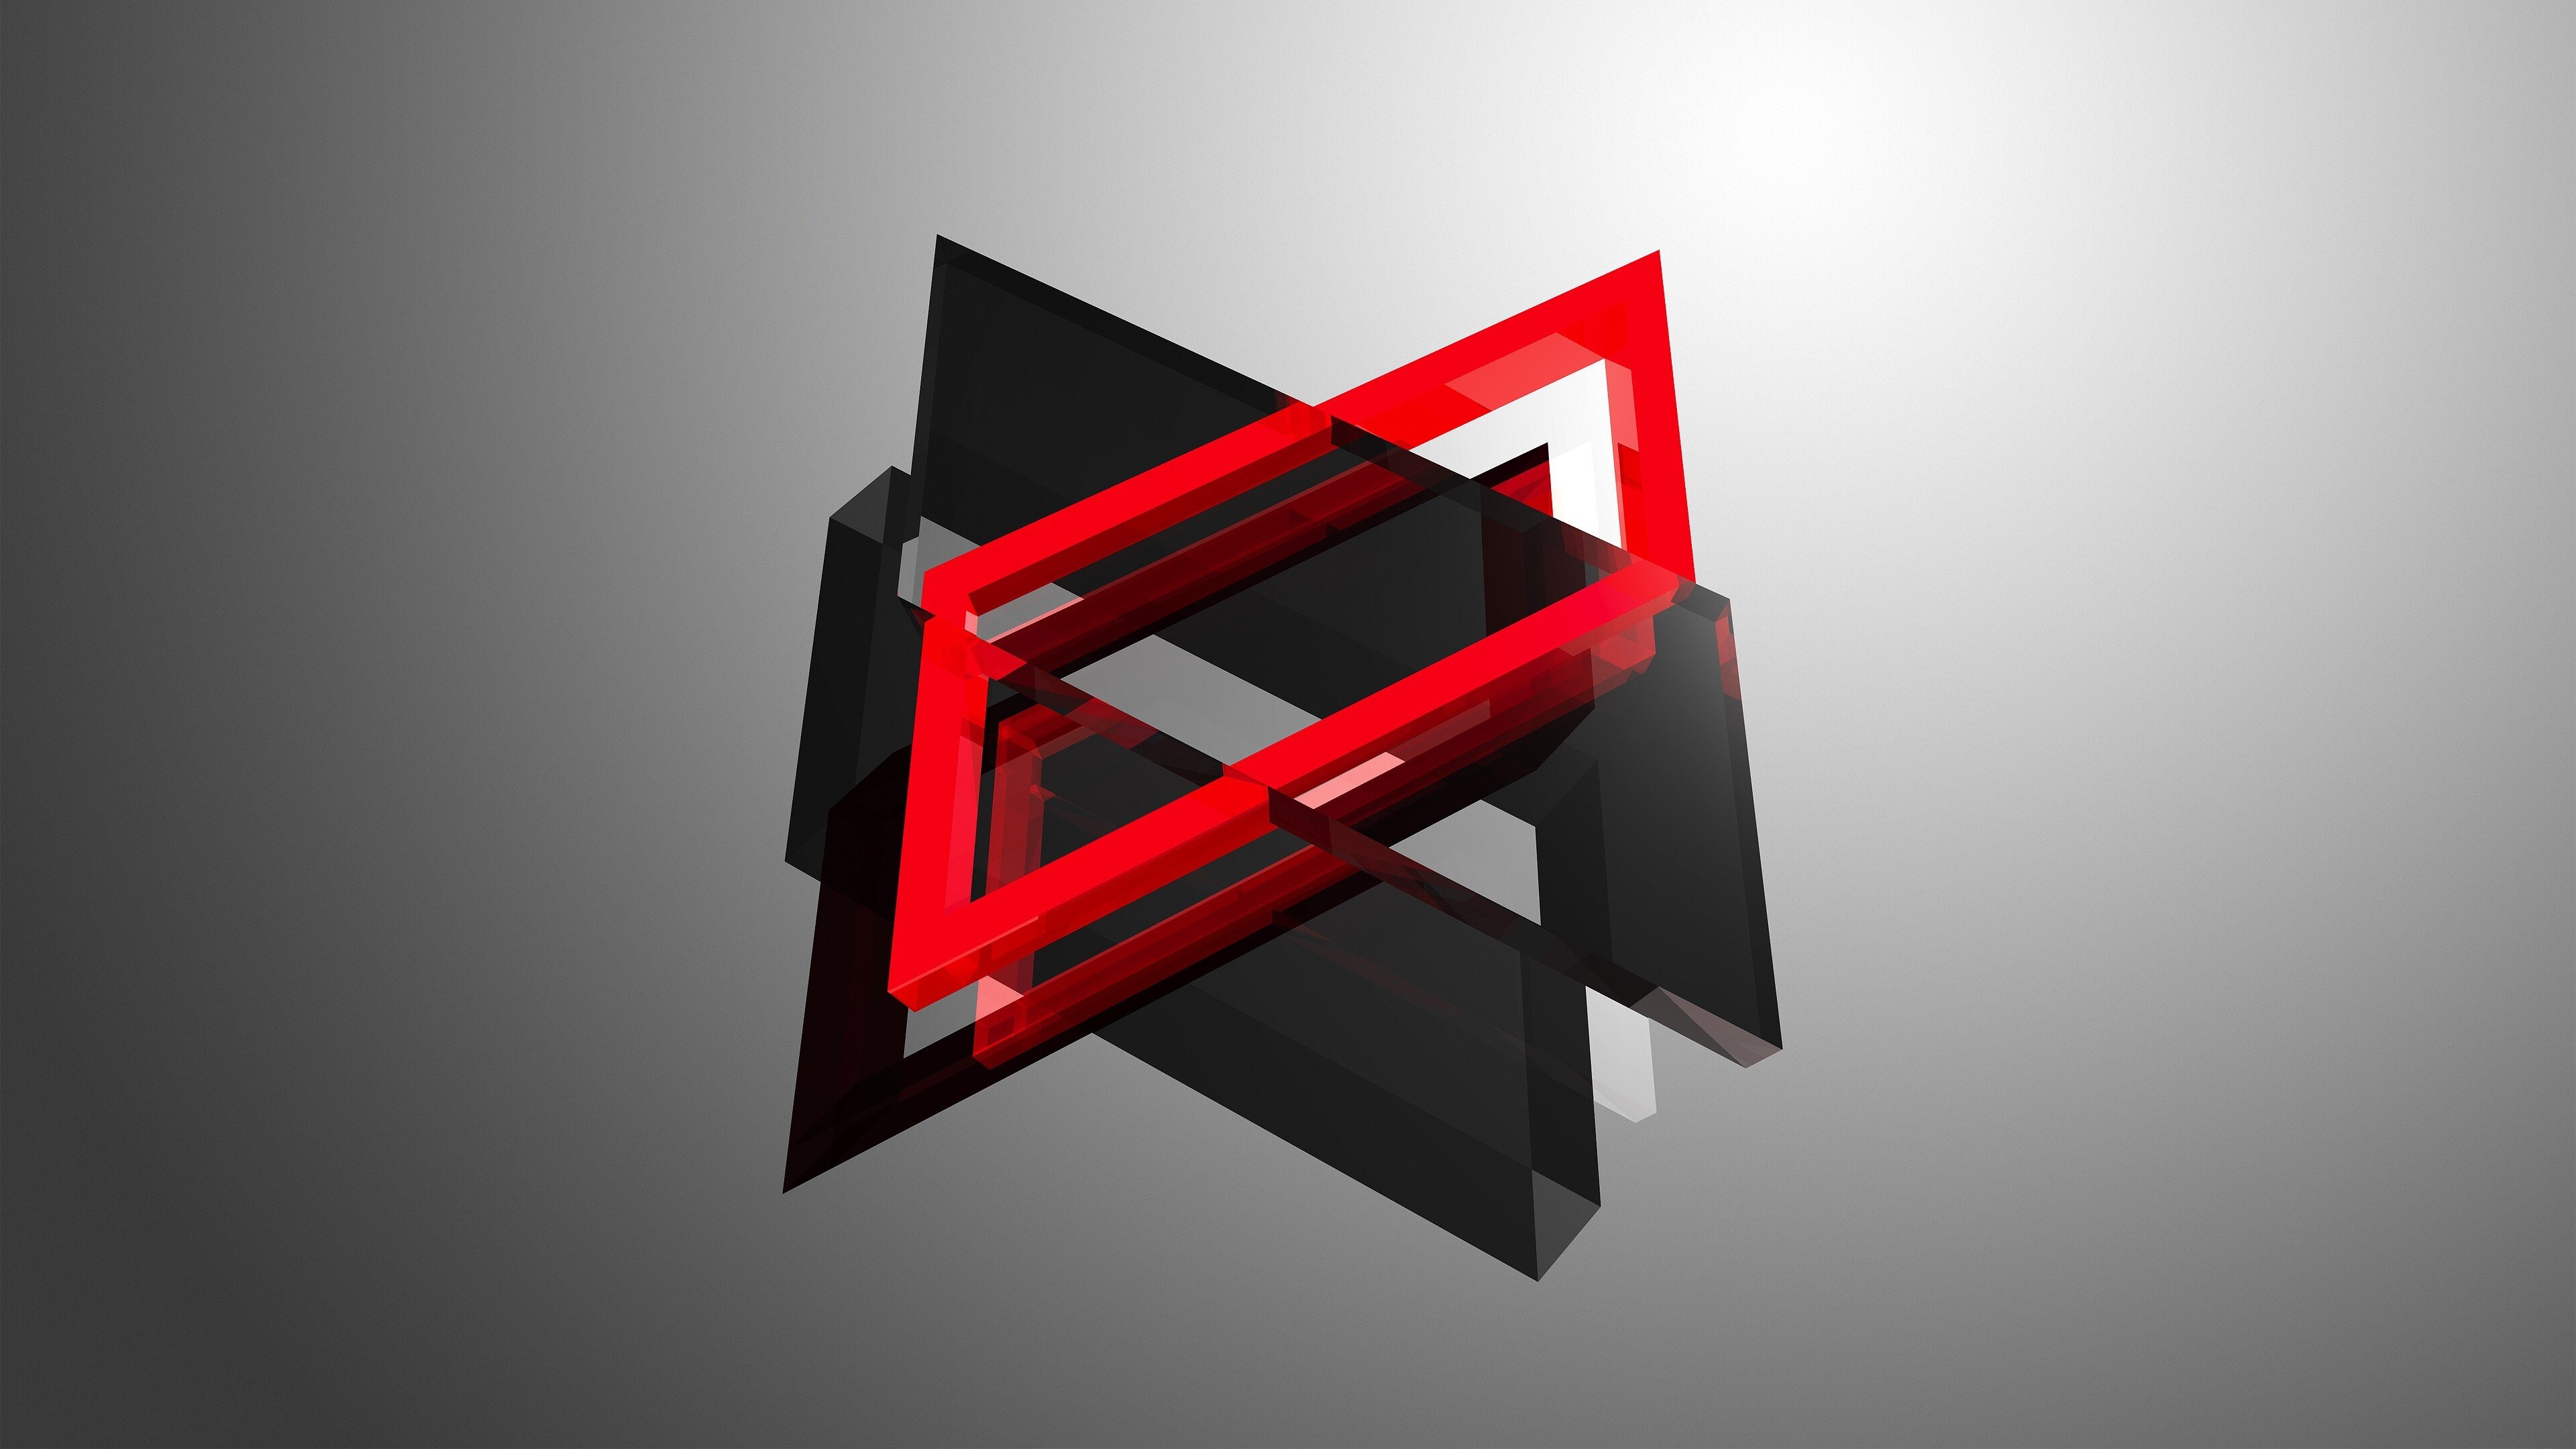 Geometric Abstract: Parallelograms, Three-dimensional shape, Acute angles. 3840x2160 4K Wallpaper.